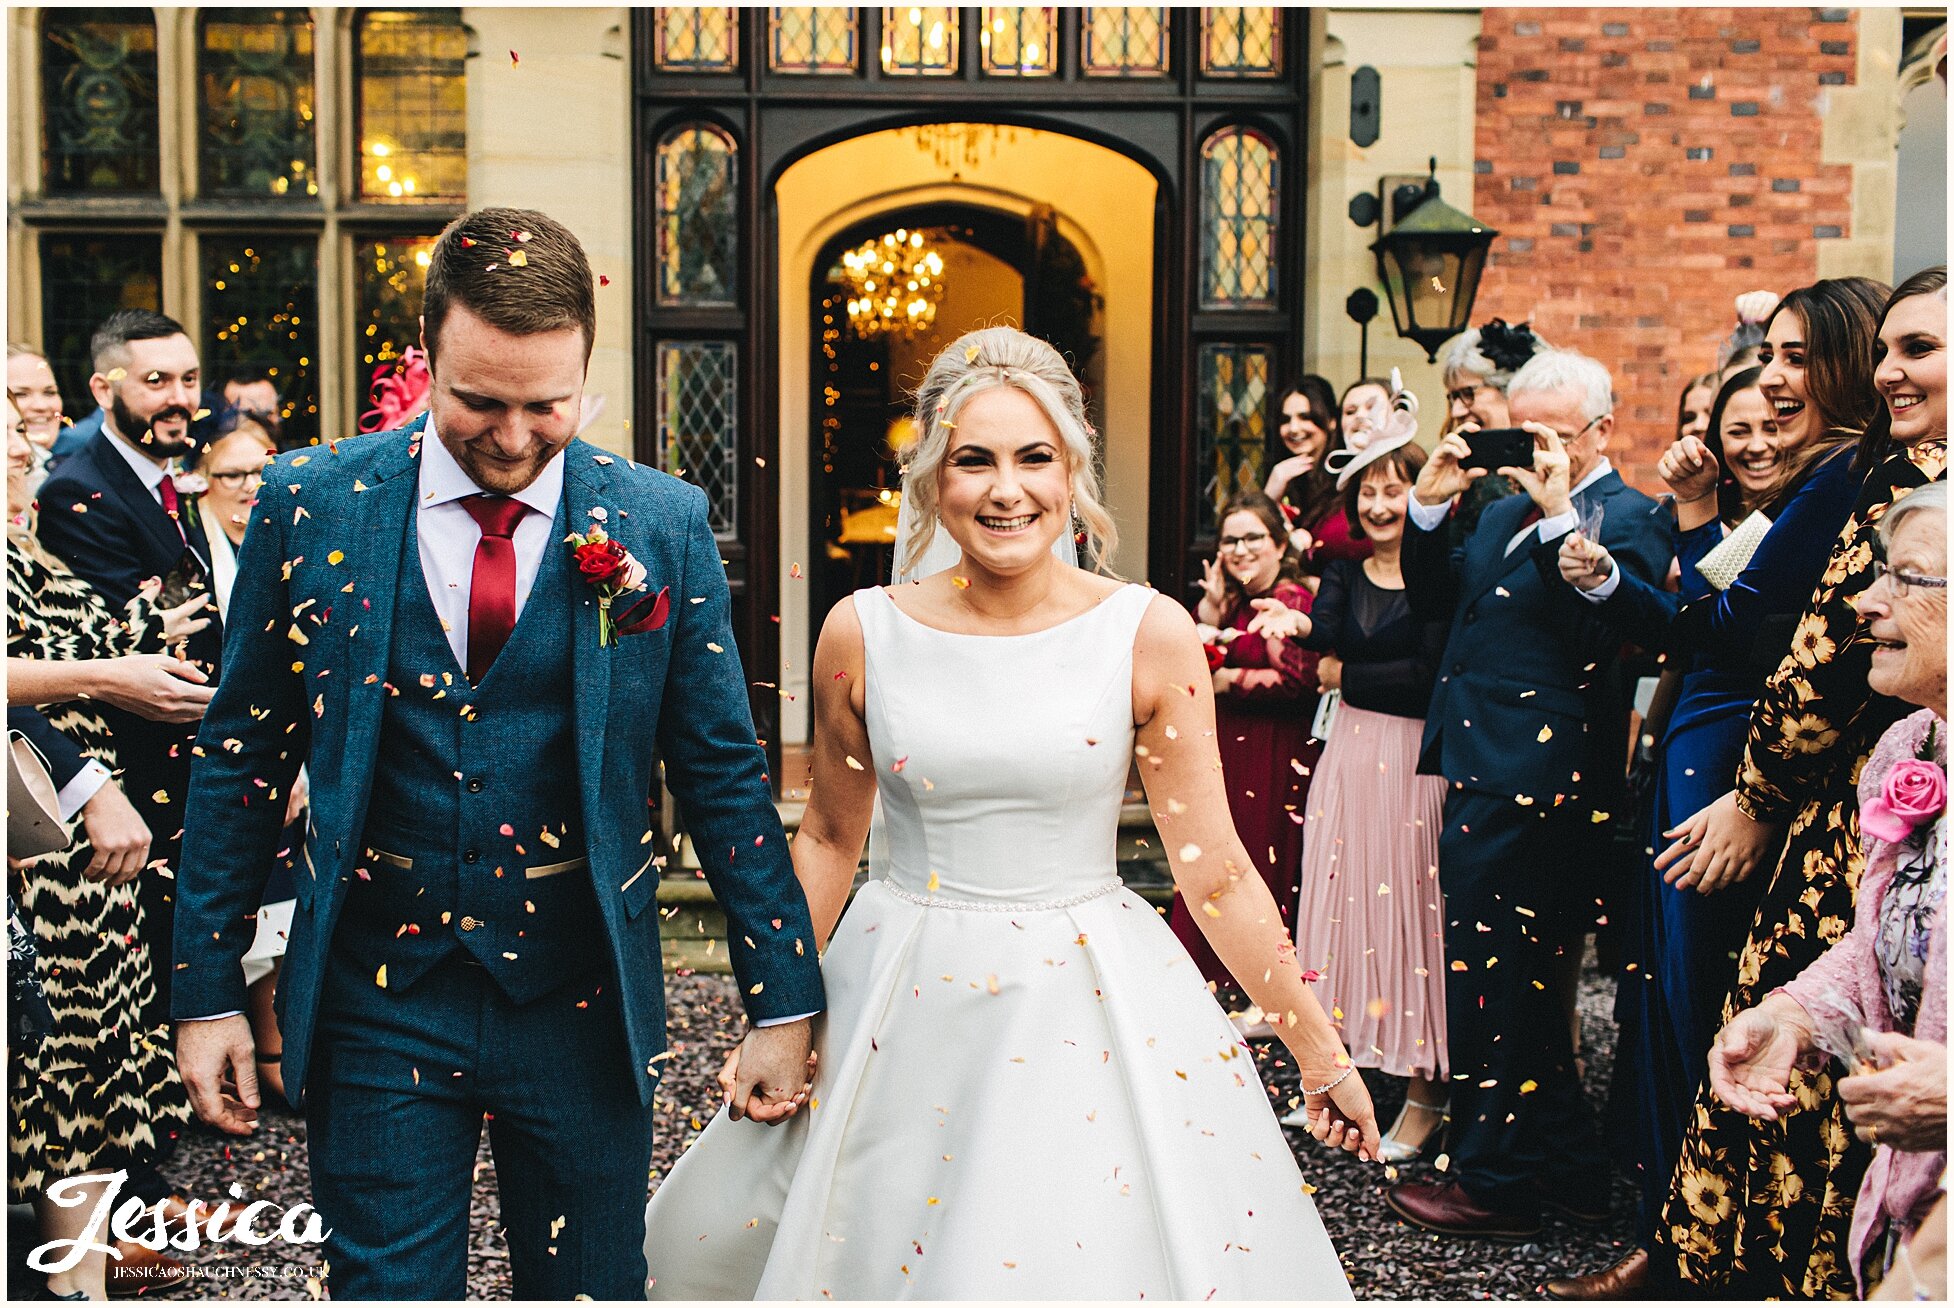 couple showered in confetti at their winter wedding